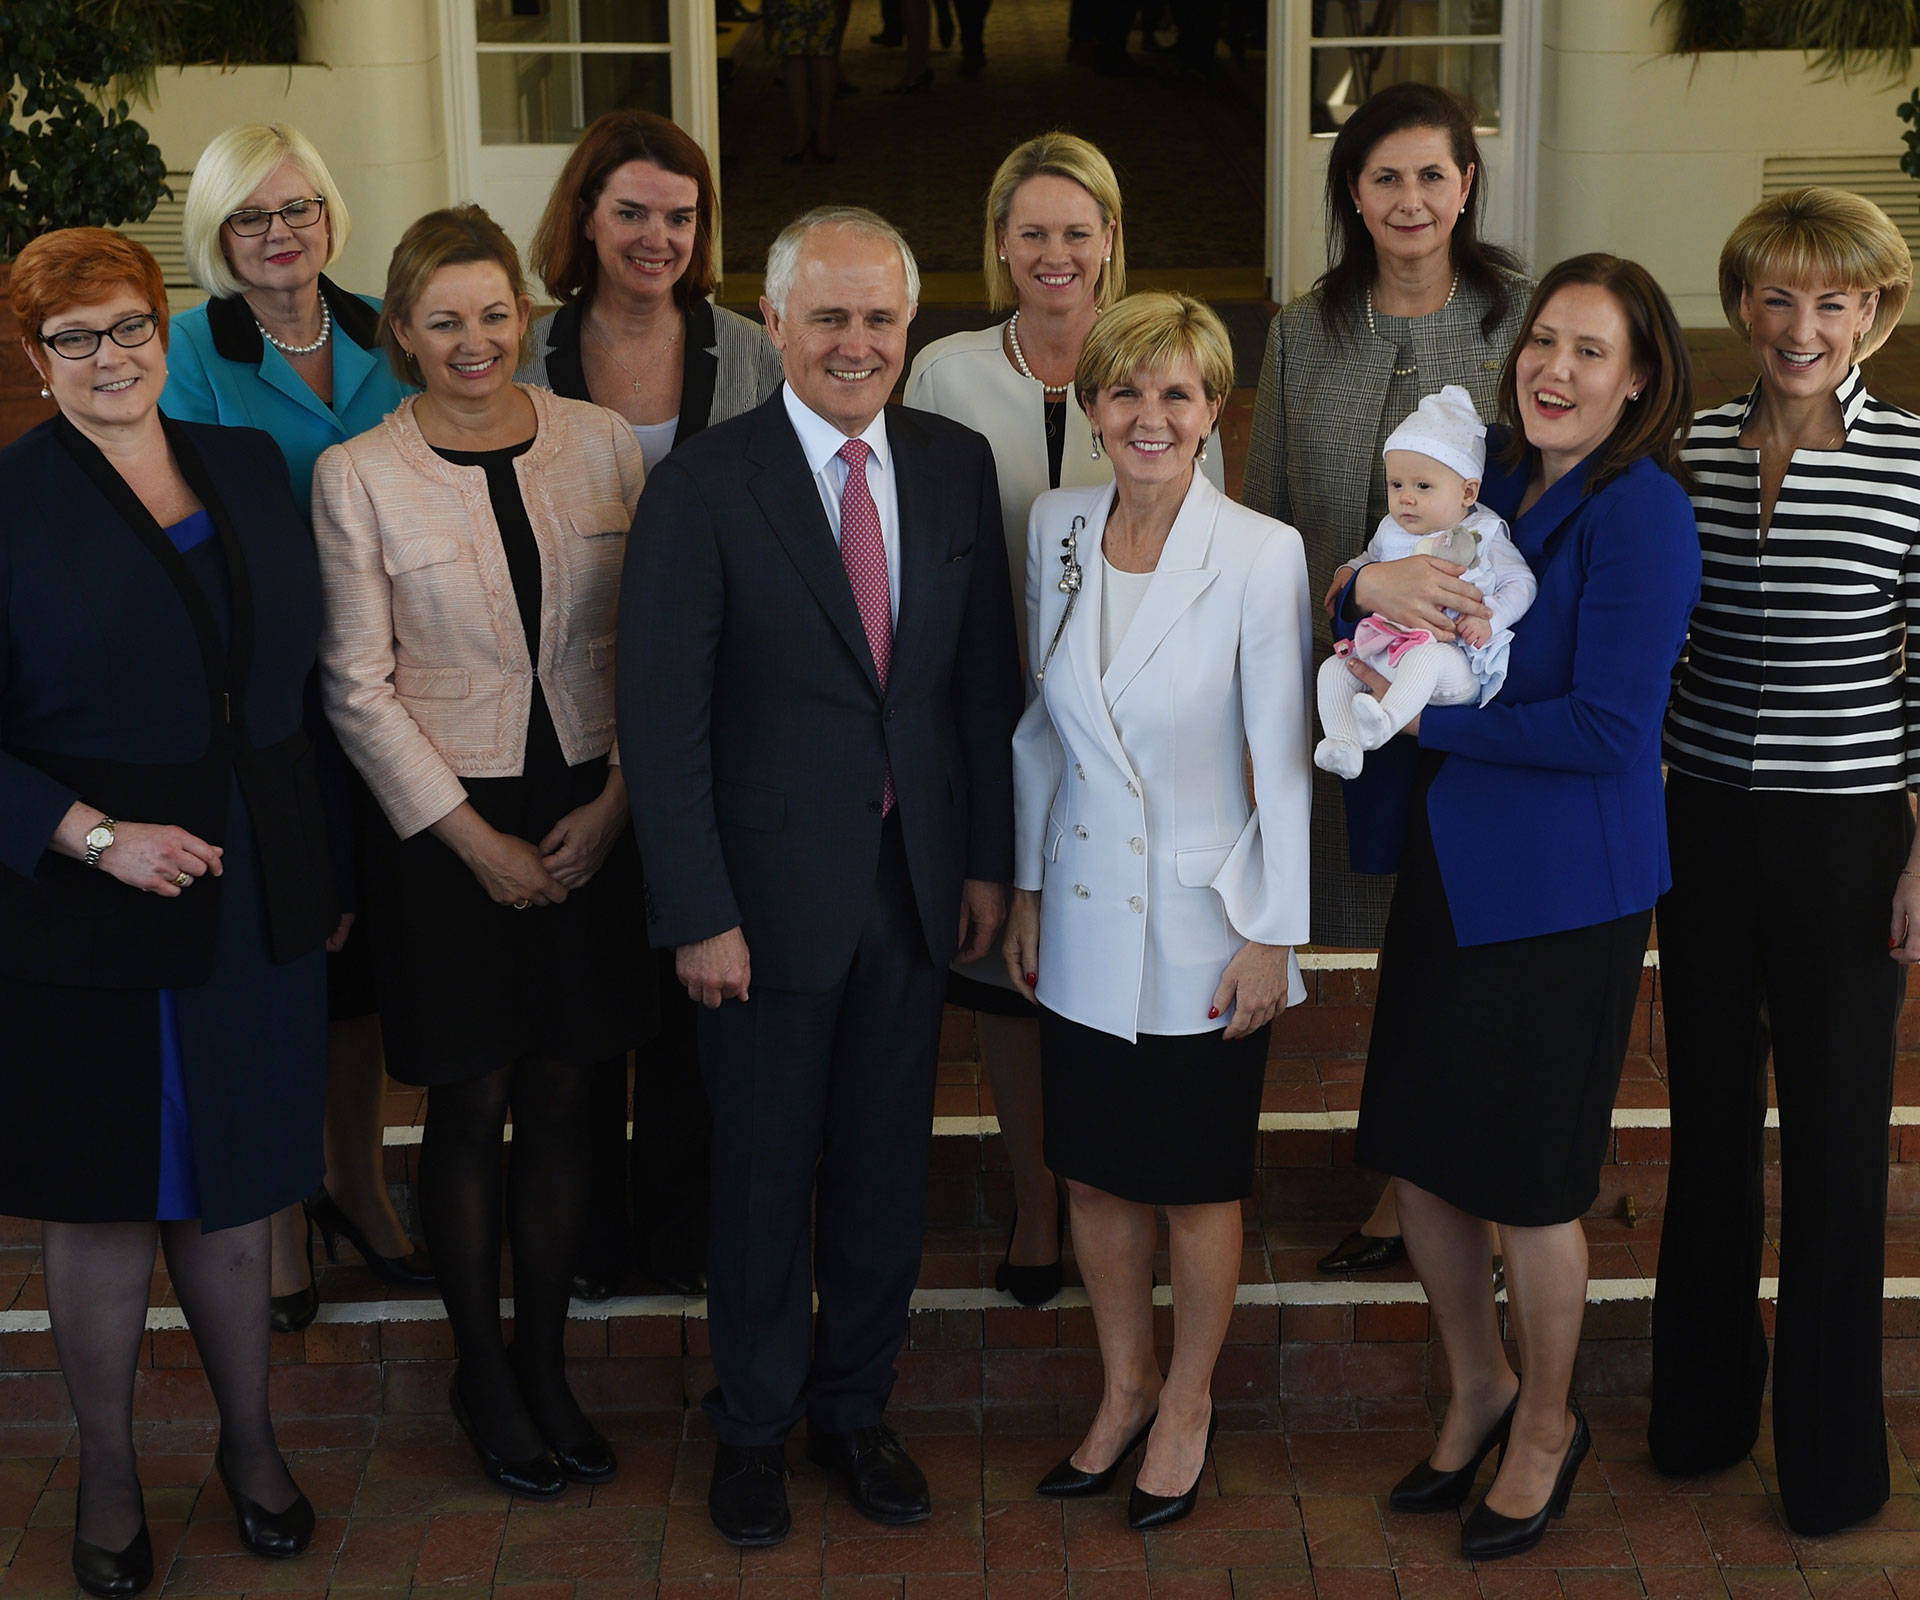 Why we need a quota for women in parliament